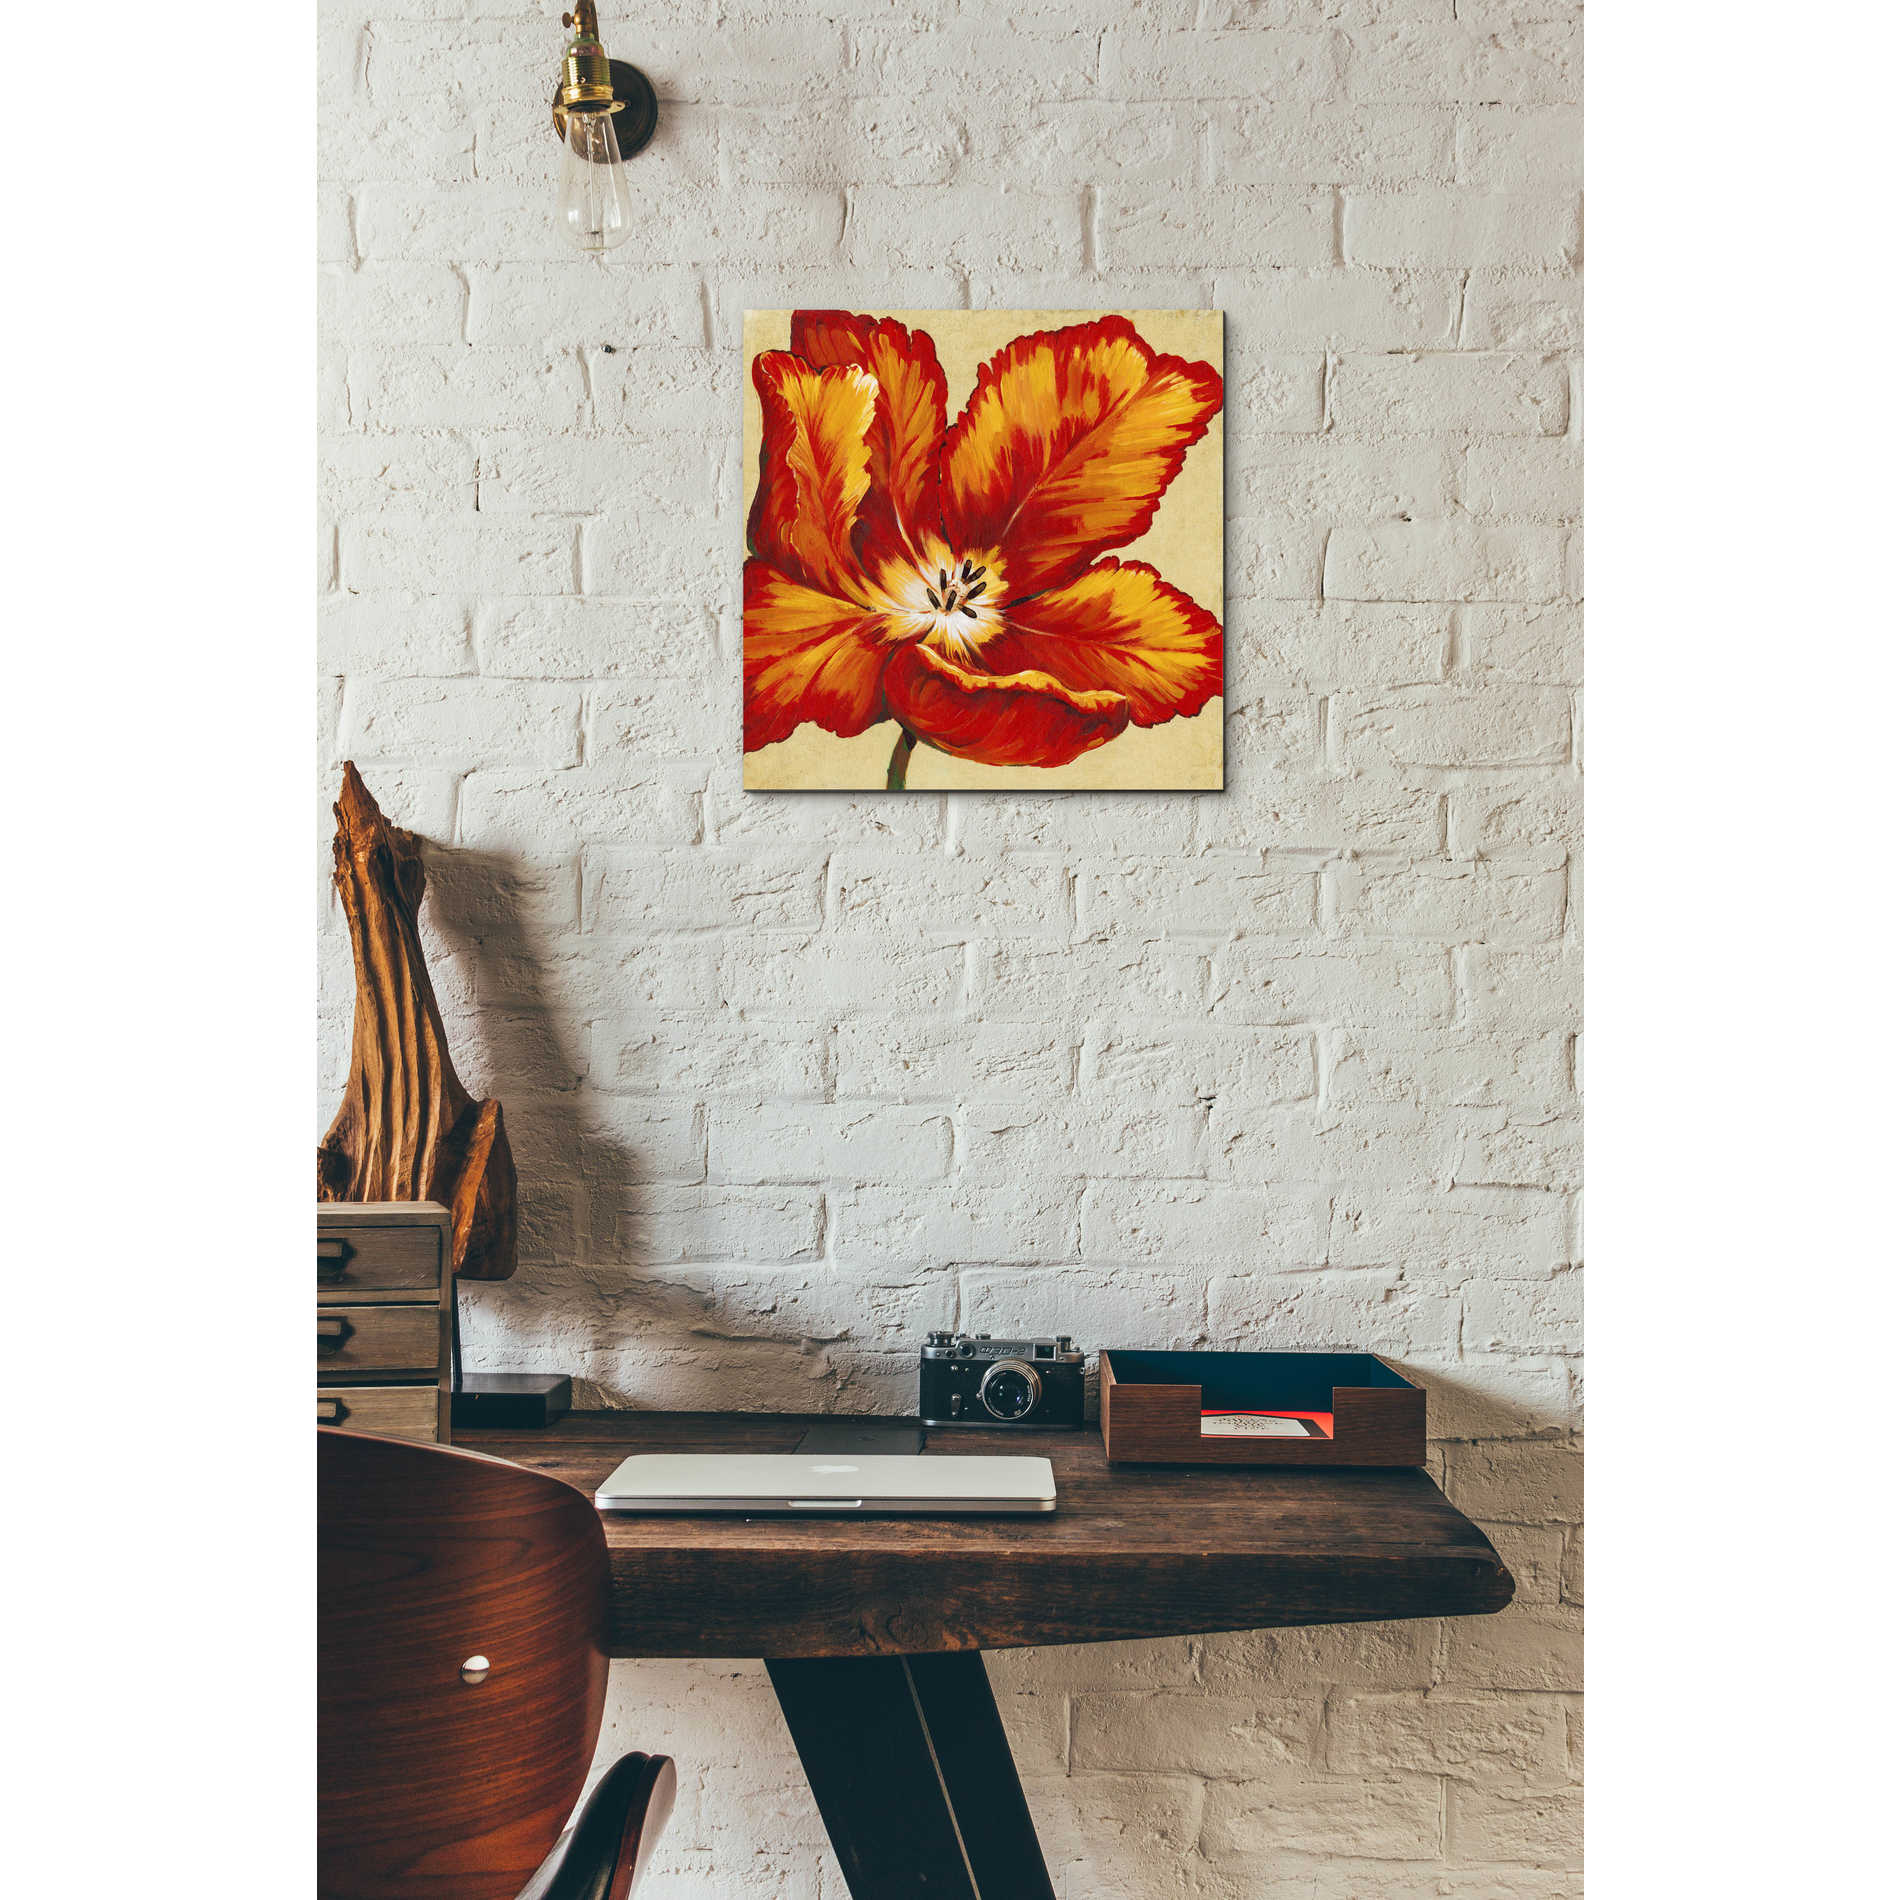 Epic Art 'Parrot Tulip I' by Tim O'Toole, Acrylic Glass Wall Art,12x12